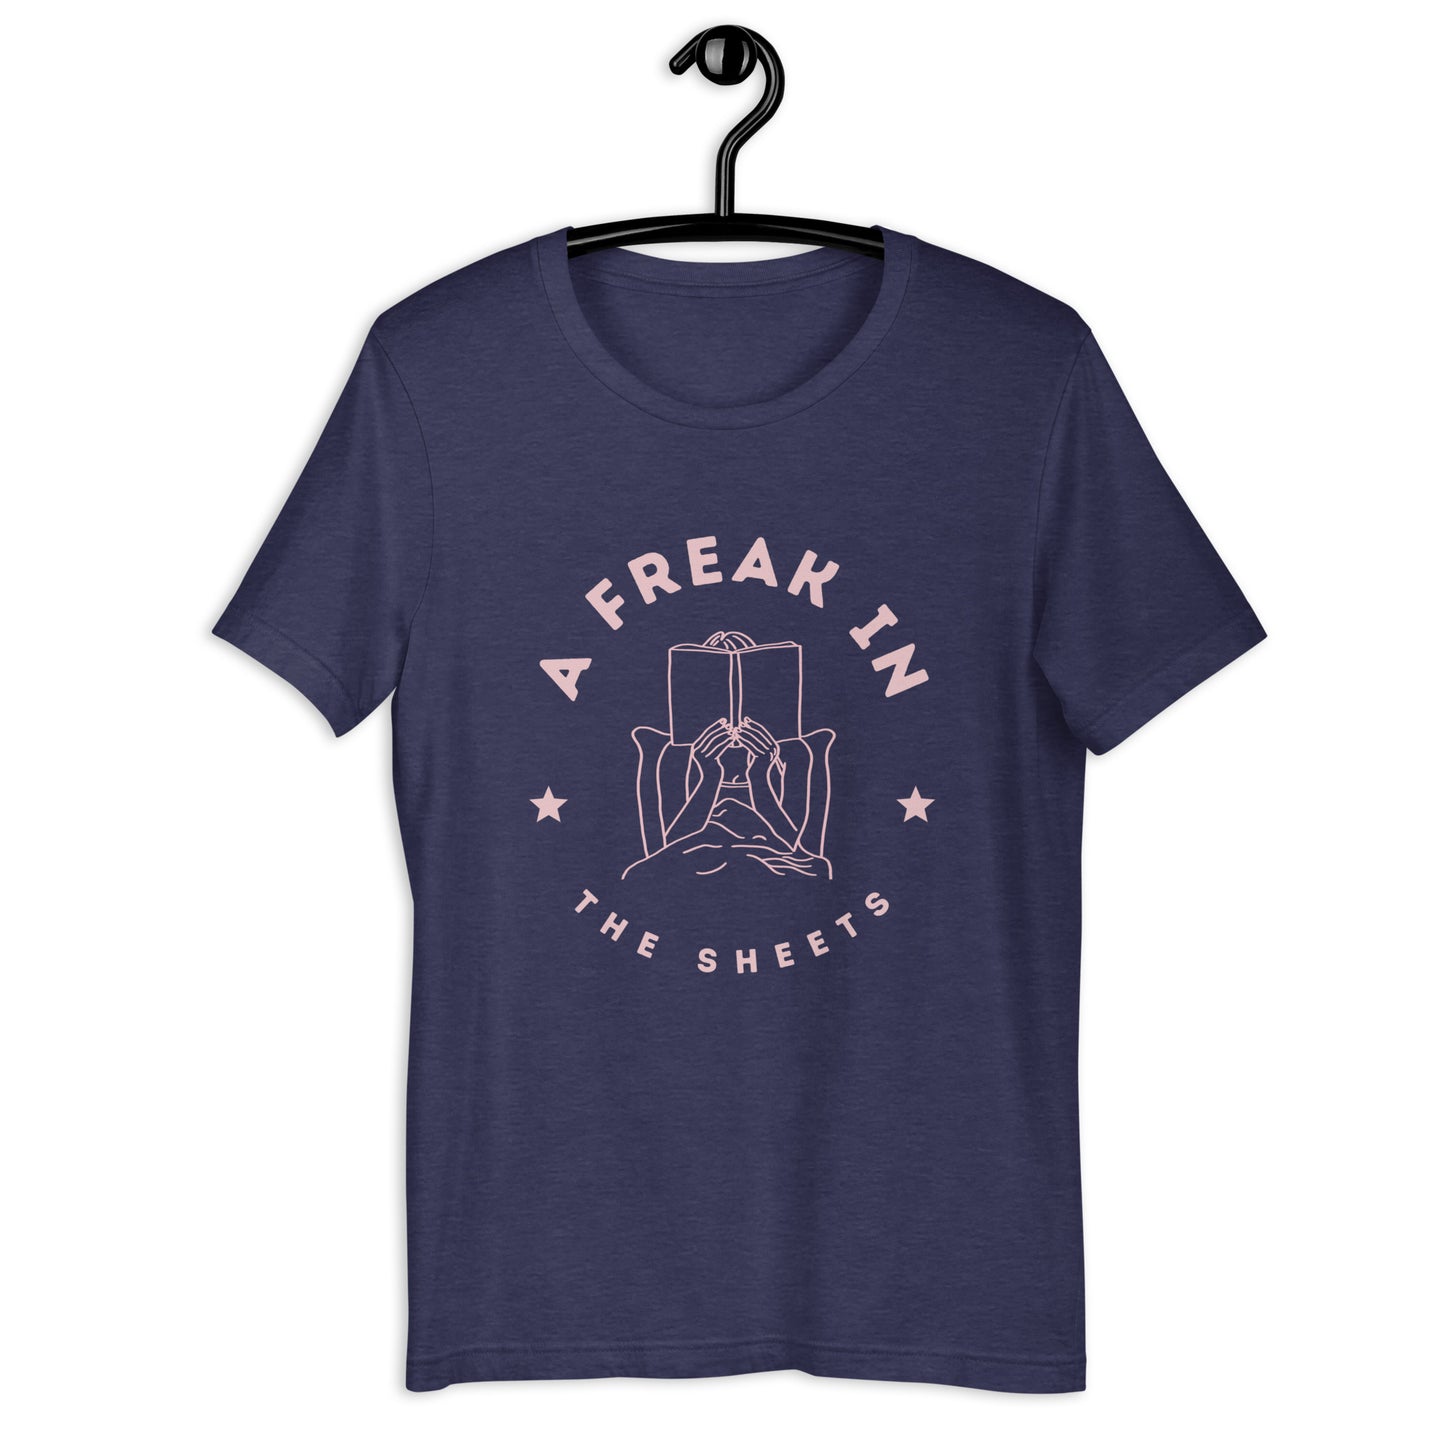 A Freak In The Sheets Romance Book Tee